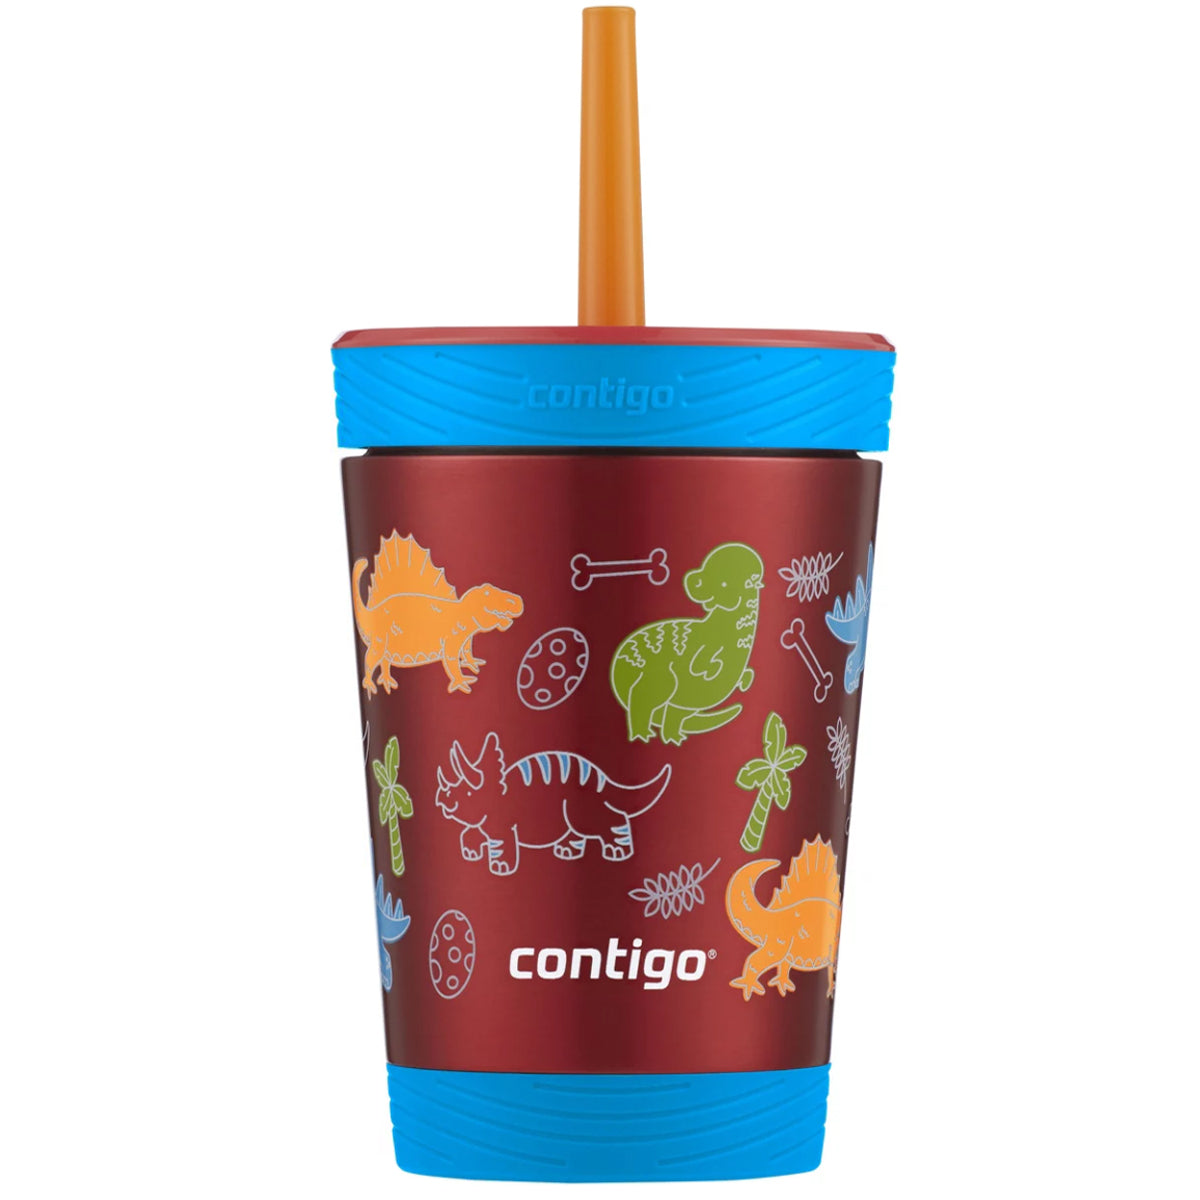 Contigo Kids Spill-Proof 14oz Tumbler with Straw and BPA-Free Plastic, Fits  Most Cup Holders and Dishwasher Safe, Honeydew